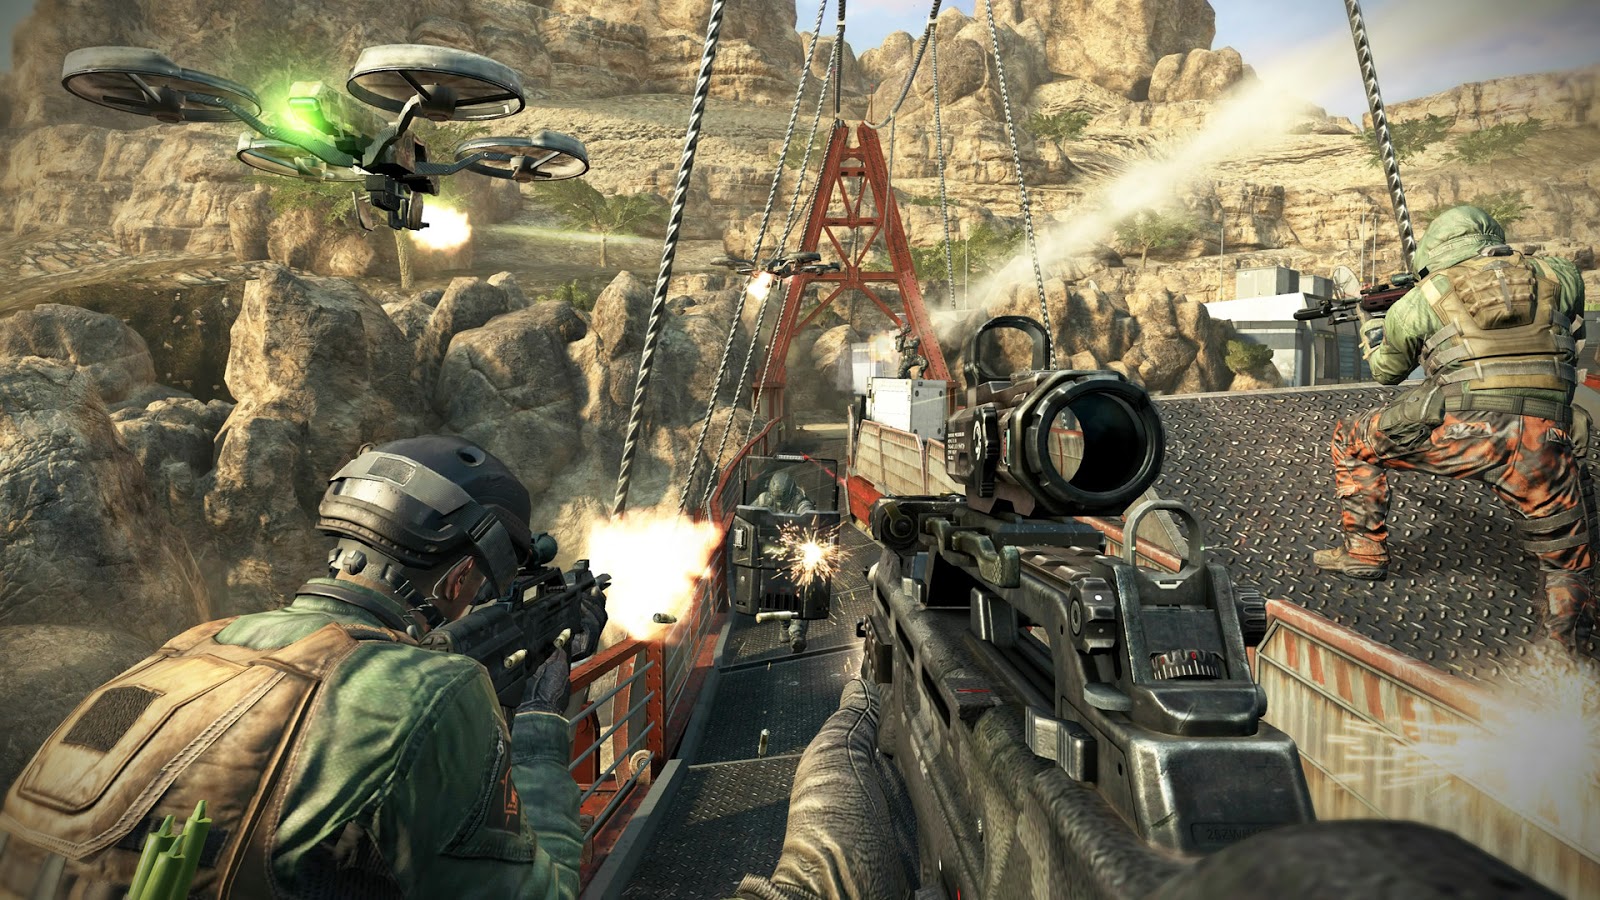 DOWNLOAD Call Of Duty Black Ops 2 With Google Drive Download Link(15 ...